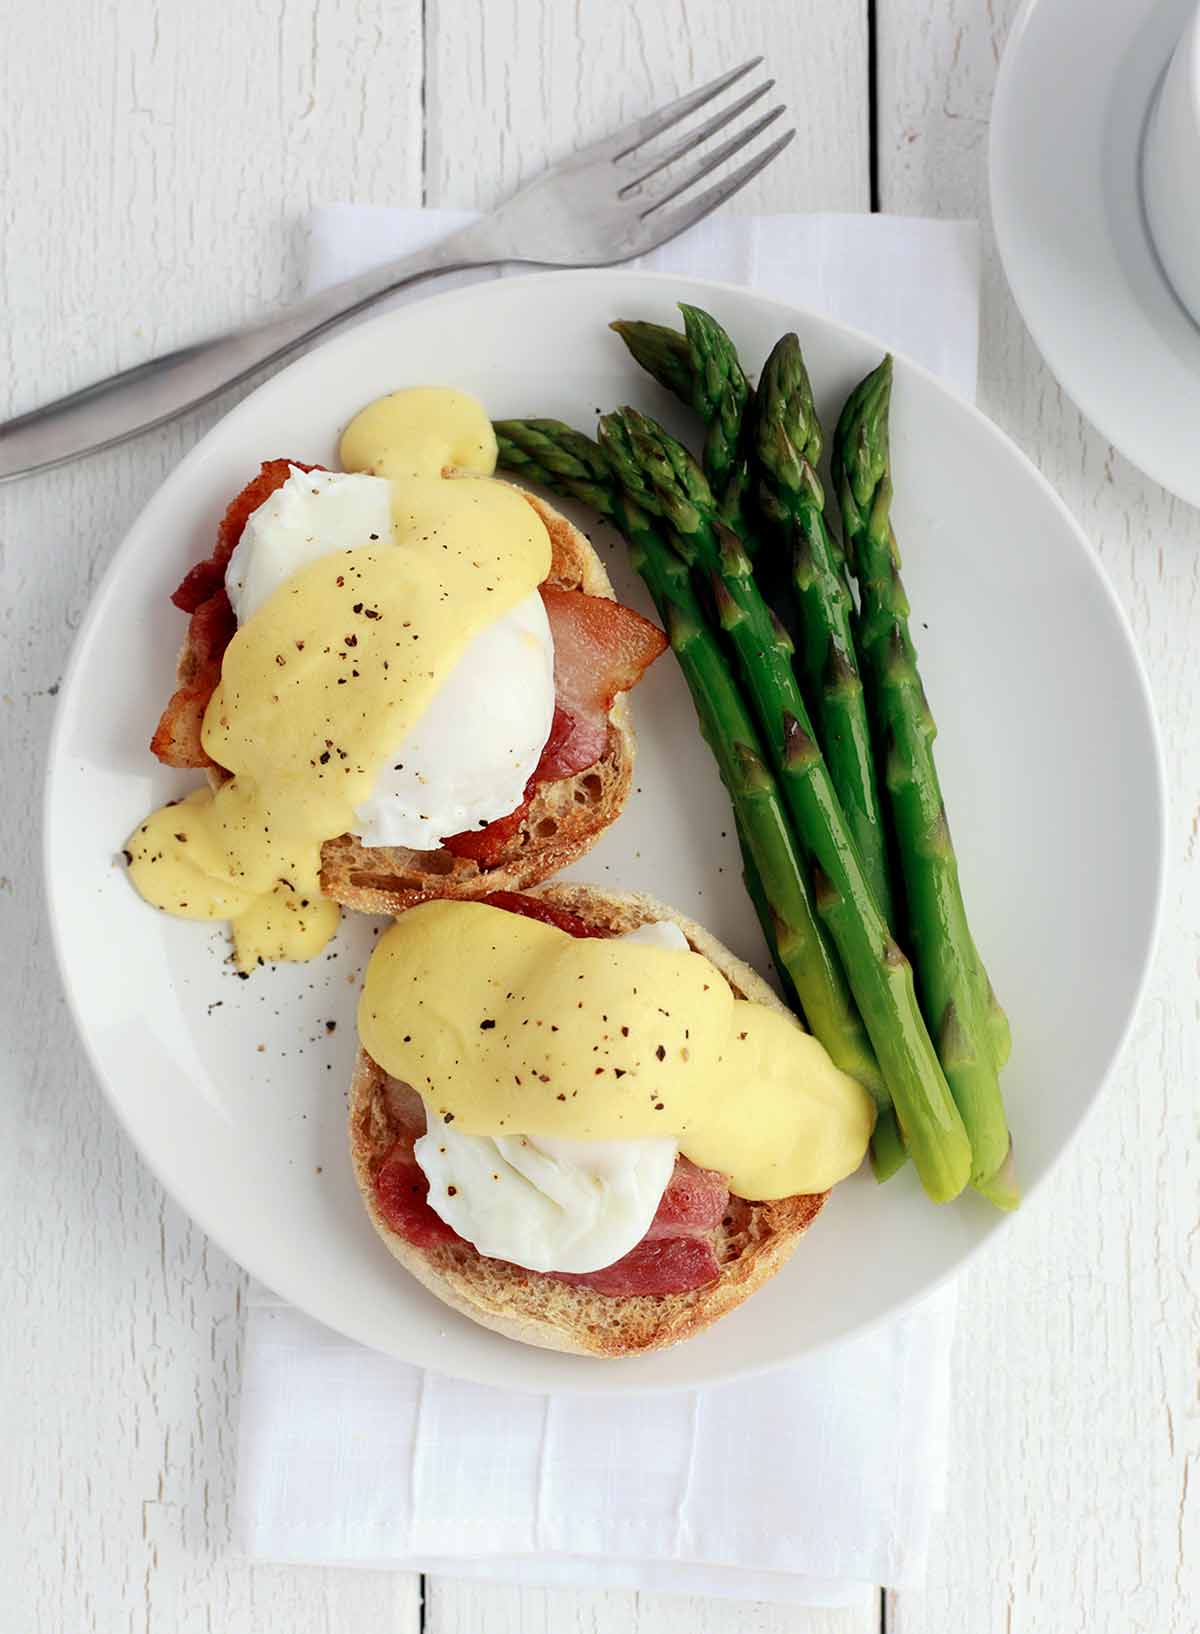 Two Julia Child's eggs Benedict on a white plate with a side of asparagus.